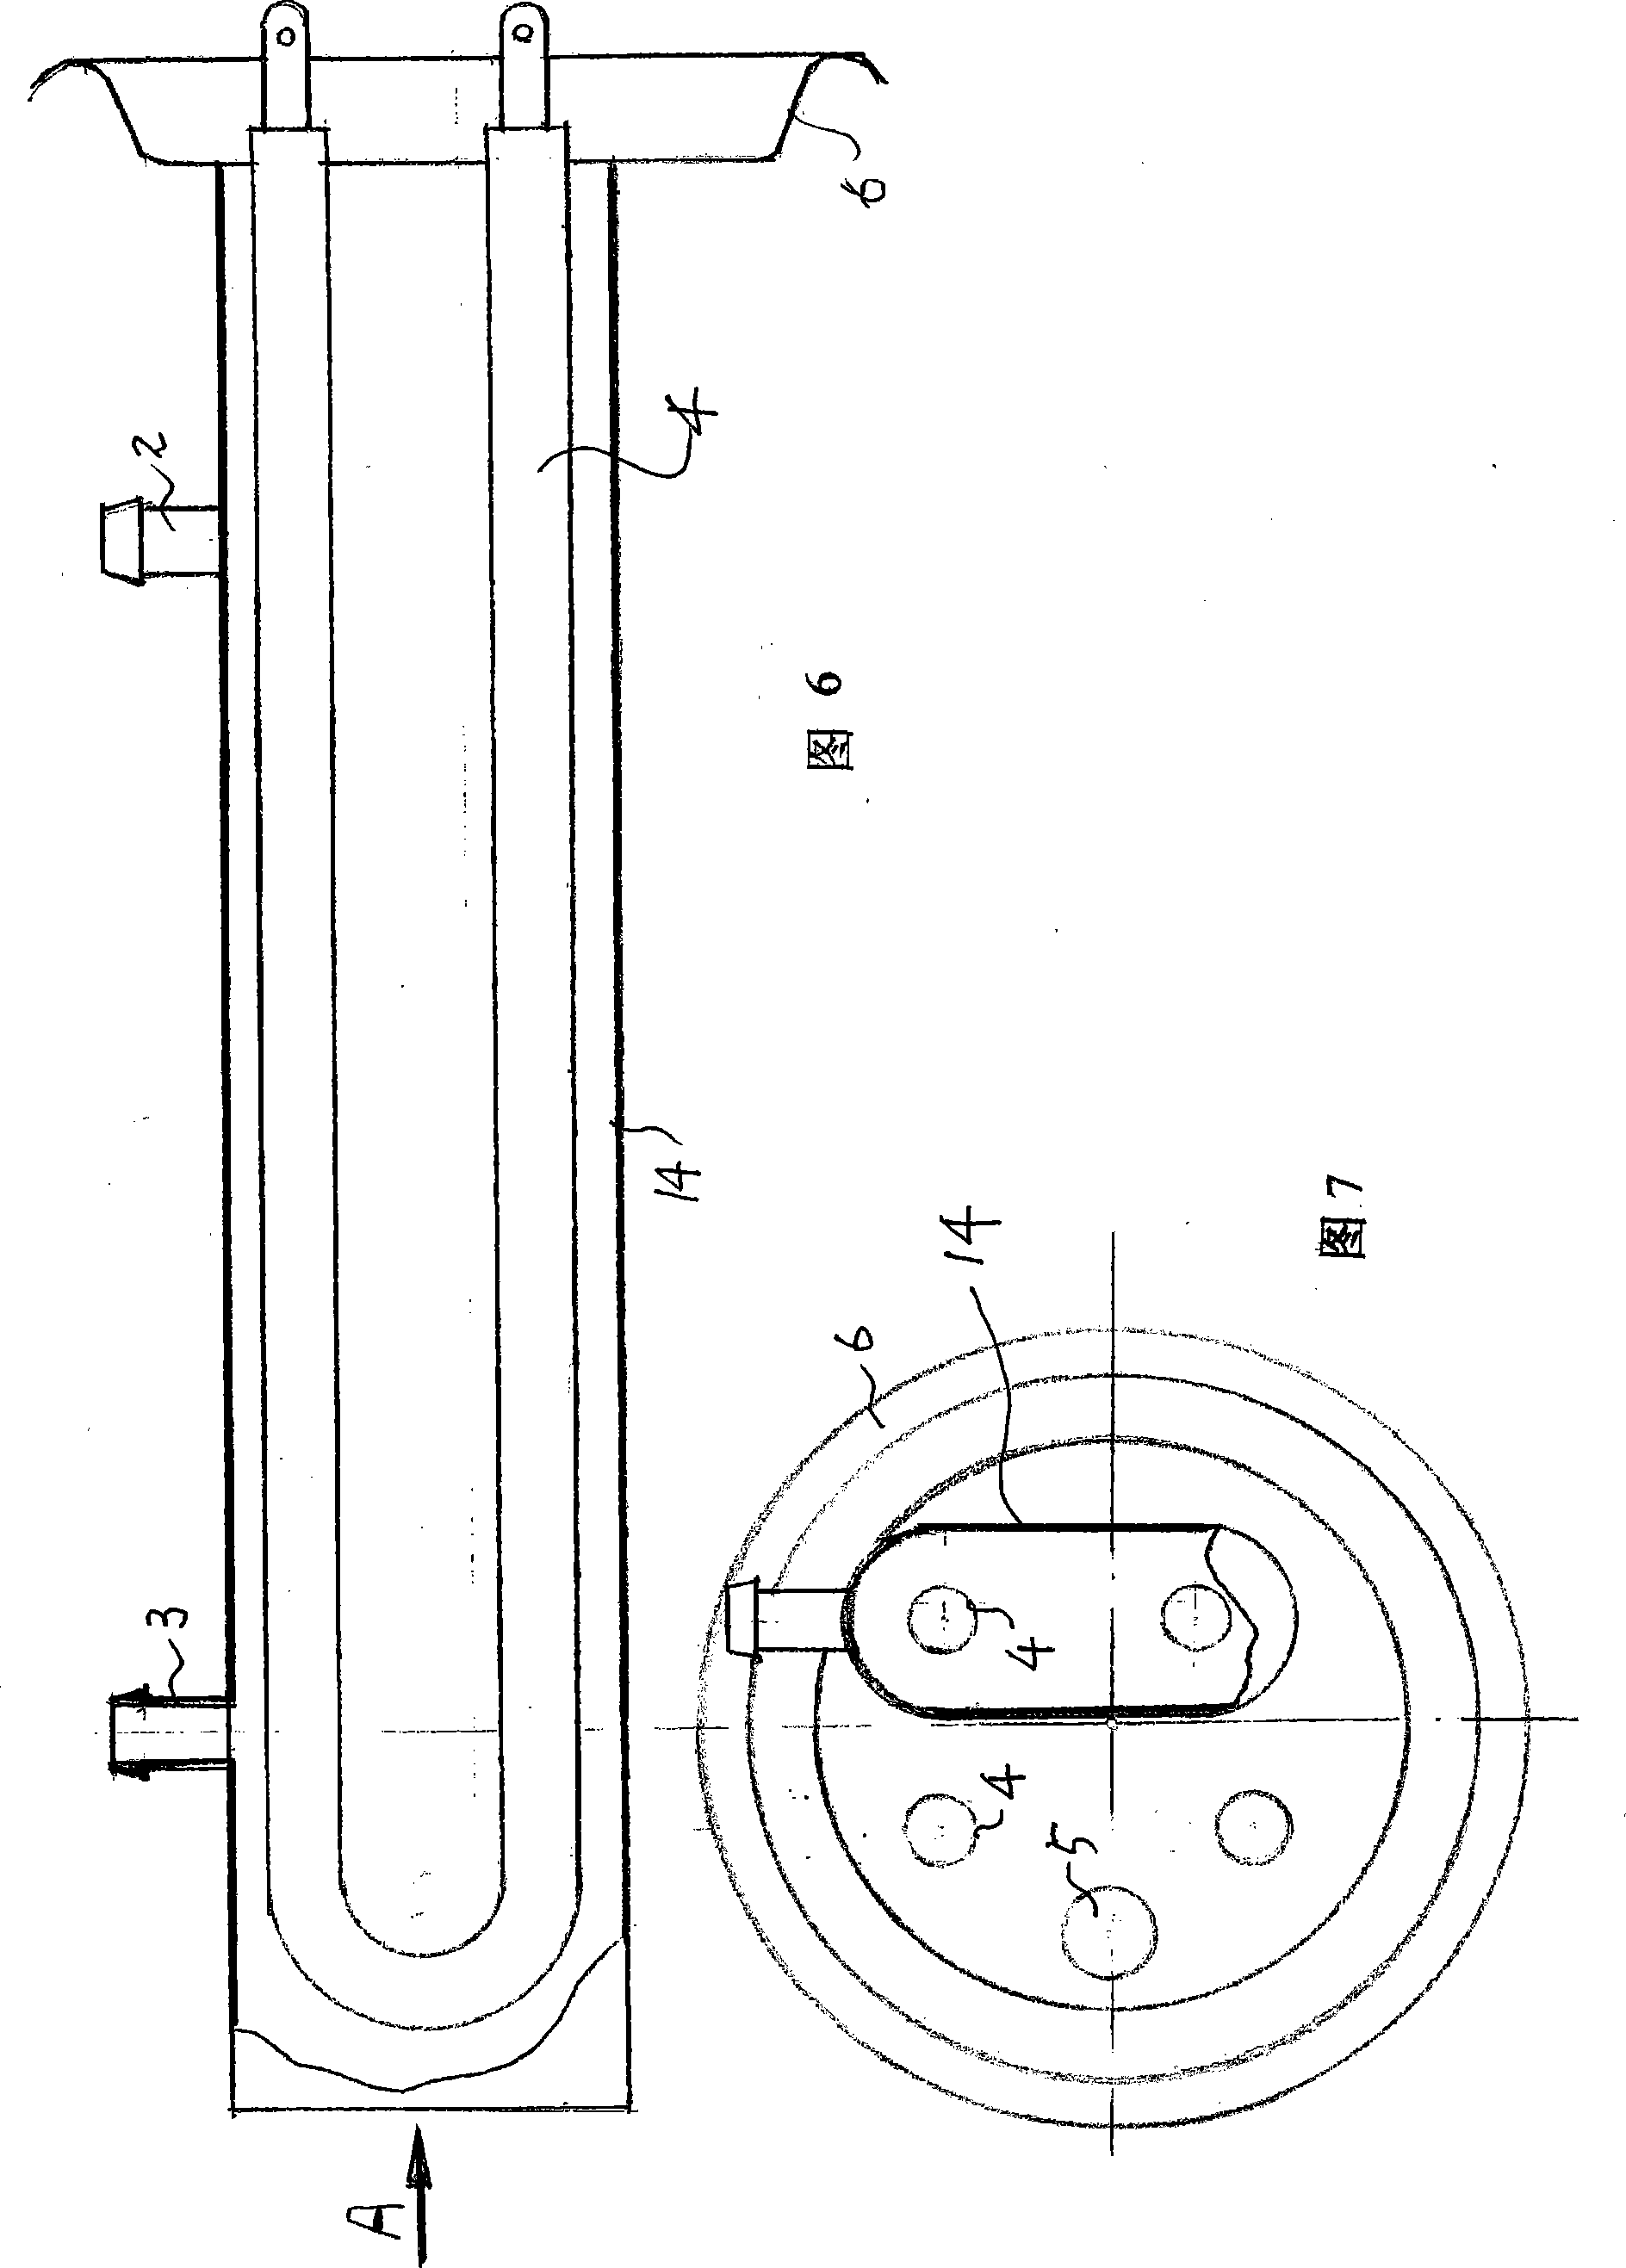 Heating device for water storage type water heater